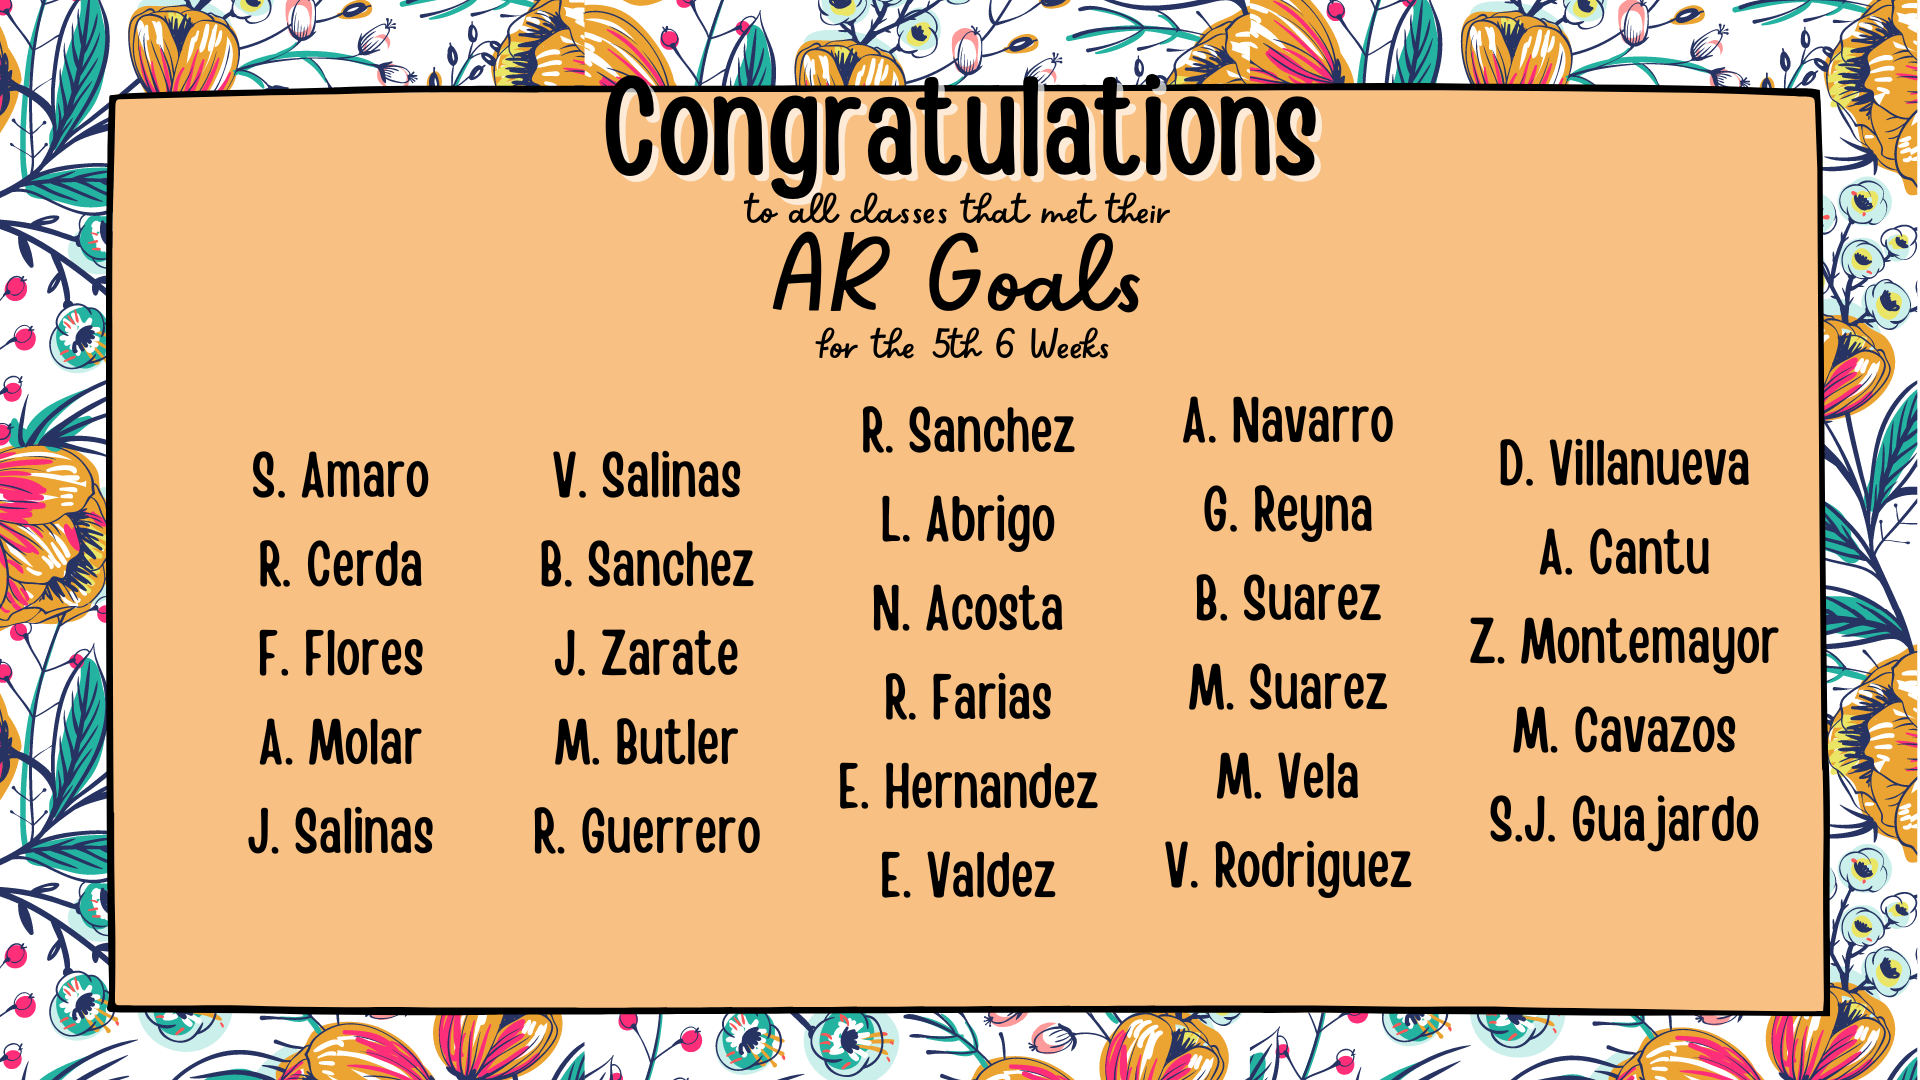 Congratulations to all classes who met their AR Goals for the 5th 6 weeks! List of teacher names